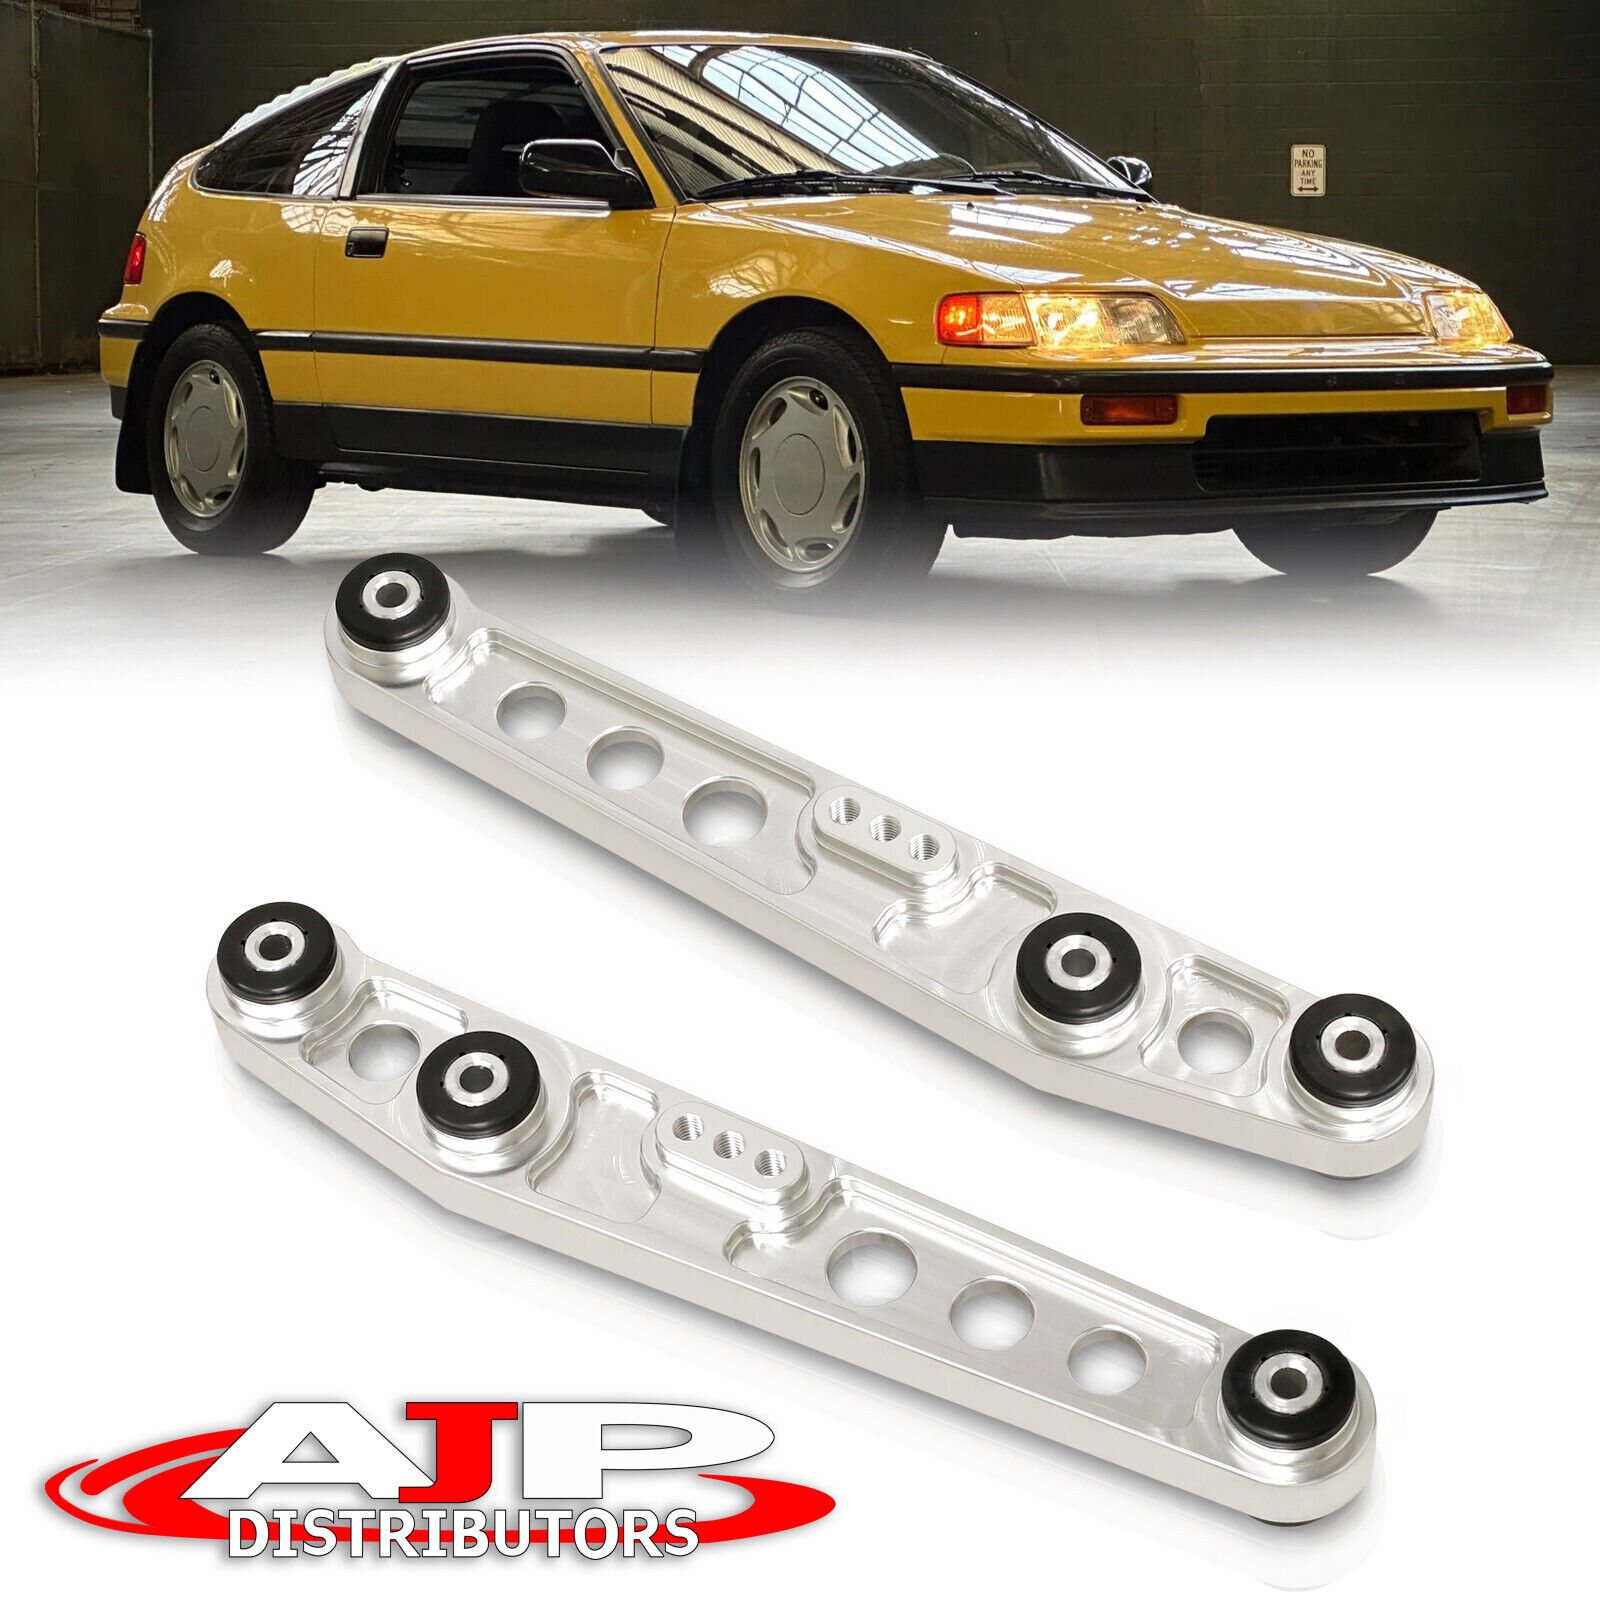 Silver JDM LCA Lower Control Arms Kit For 88-95 Civic EF EG6 / 94-01 Integra DC2